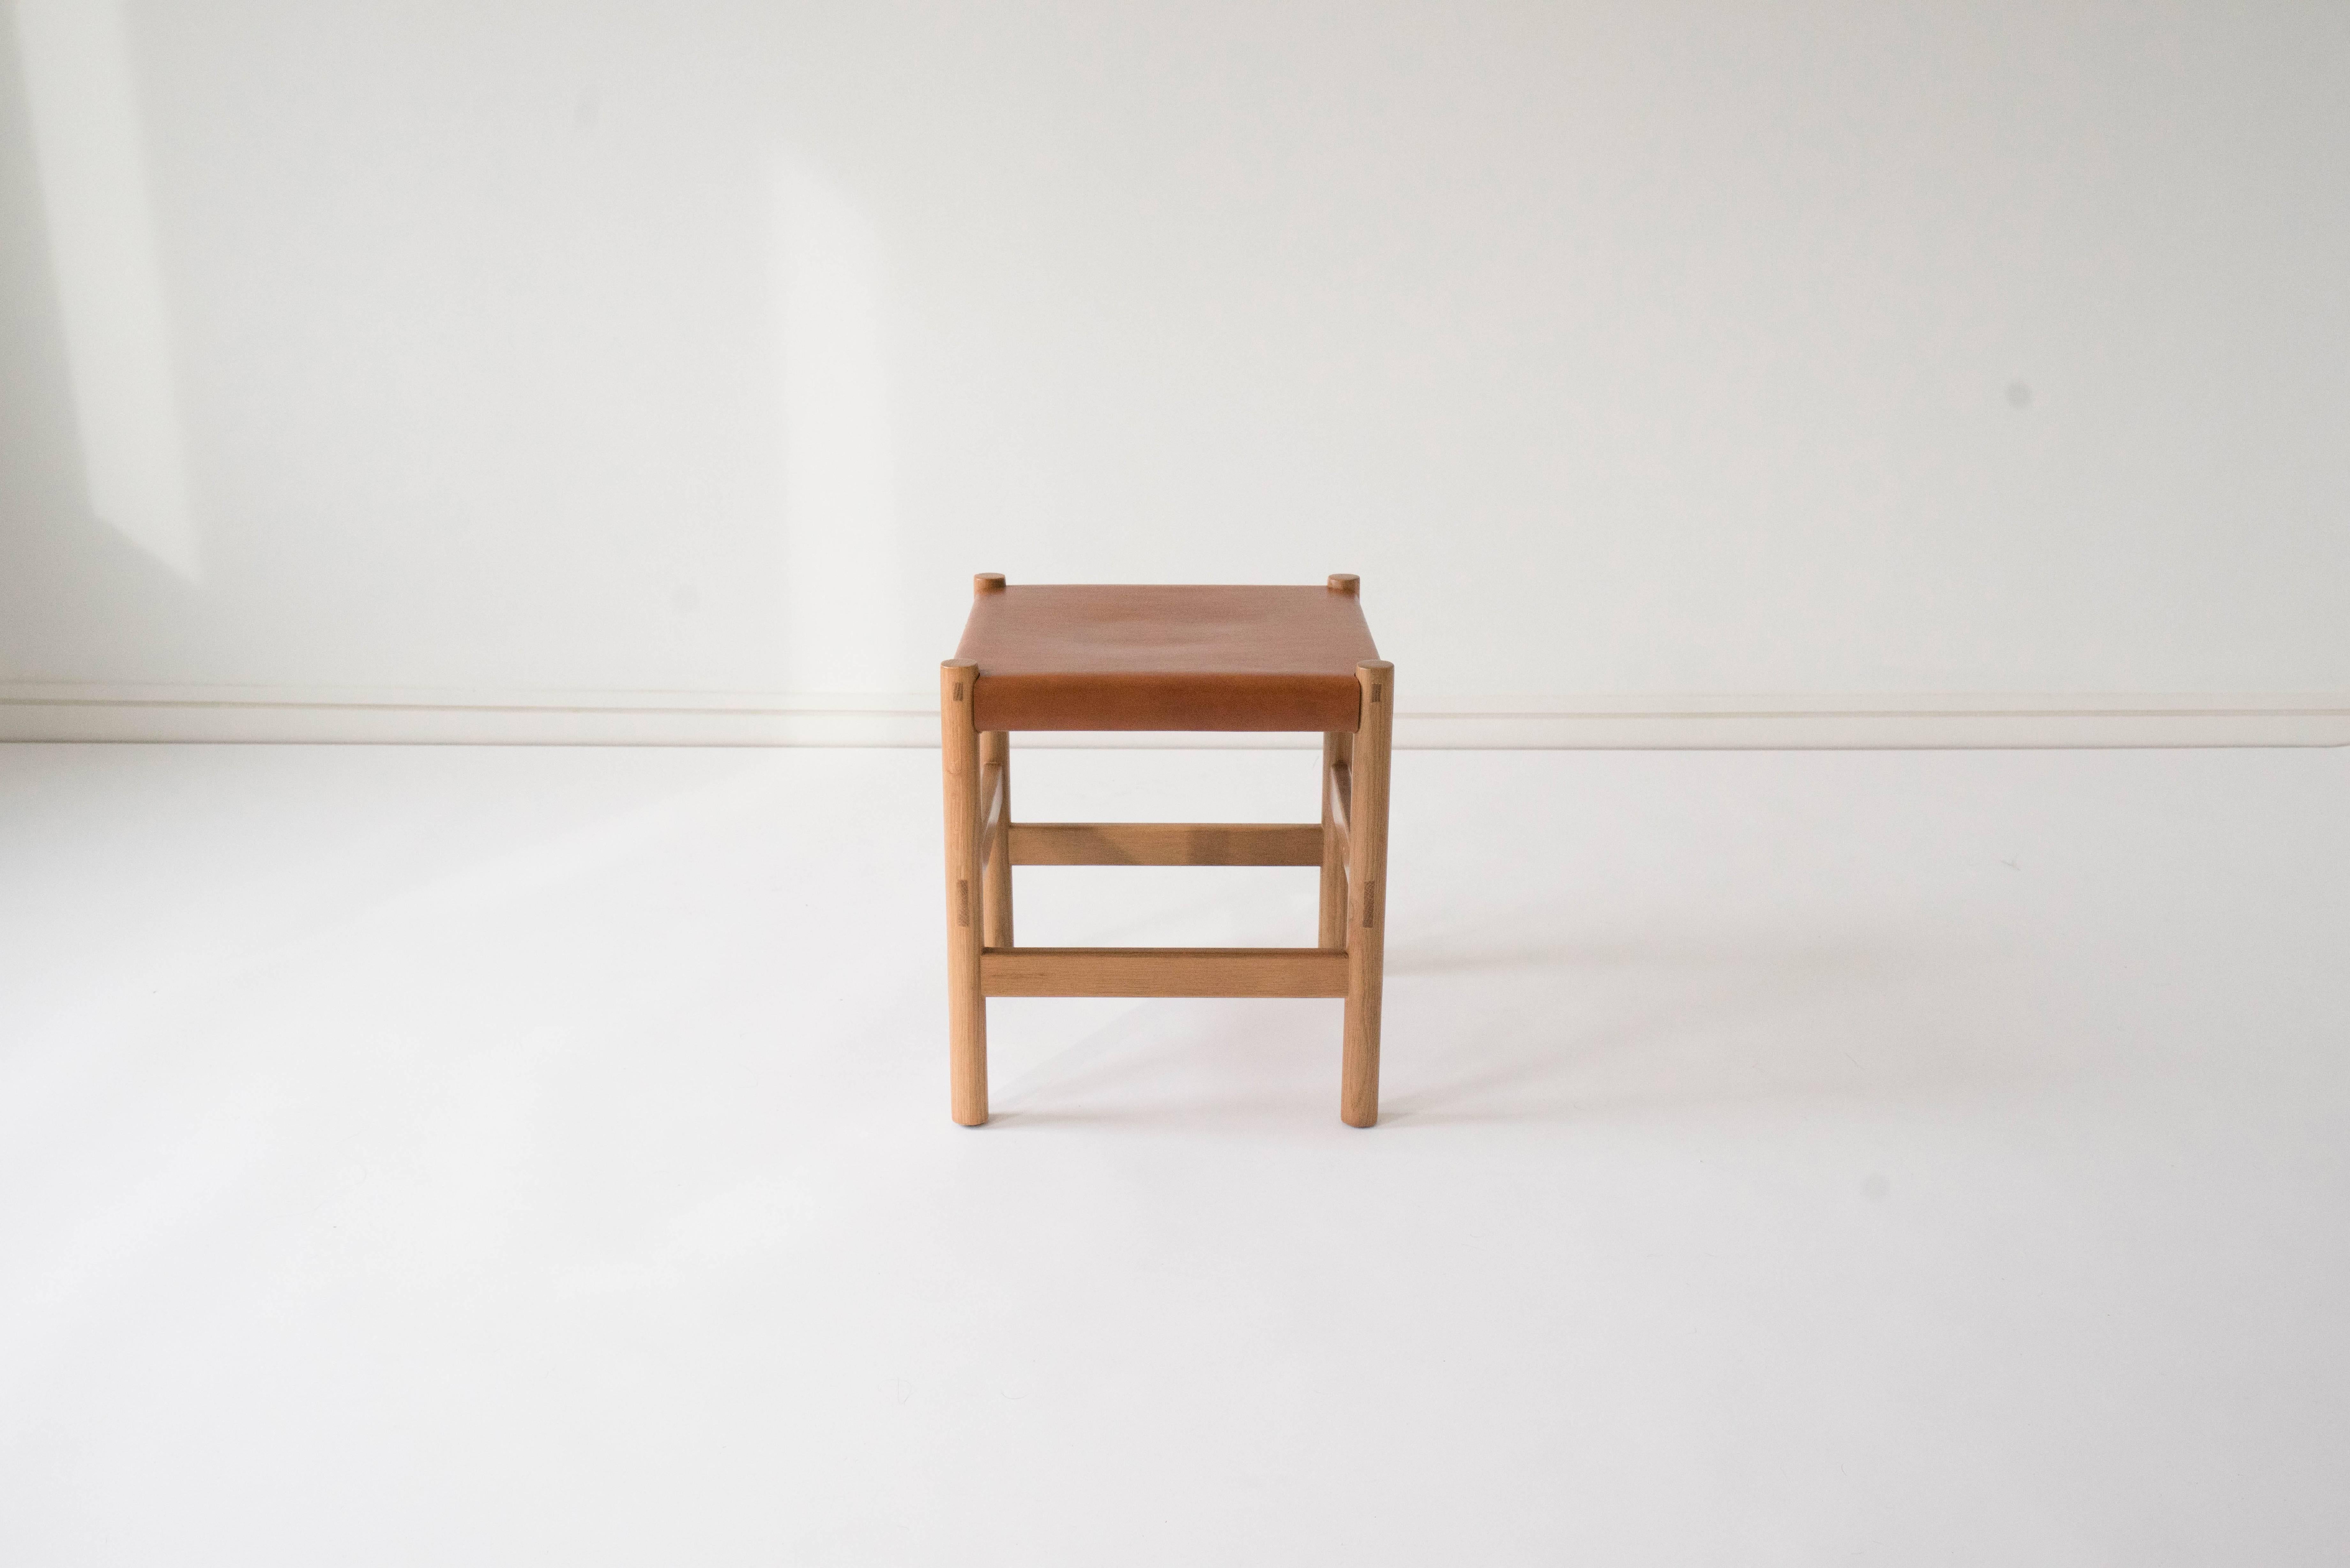 Sun at Six is a contemporary furniture design studio that works with traditional Chinese joinery masters to handcraft our pieces using traditional joinery. A simple, versatile stool. The vegetable tanned leather will patina with age. Exposed through